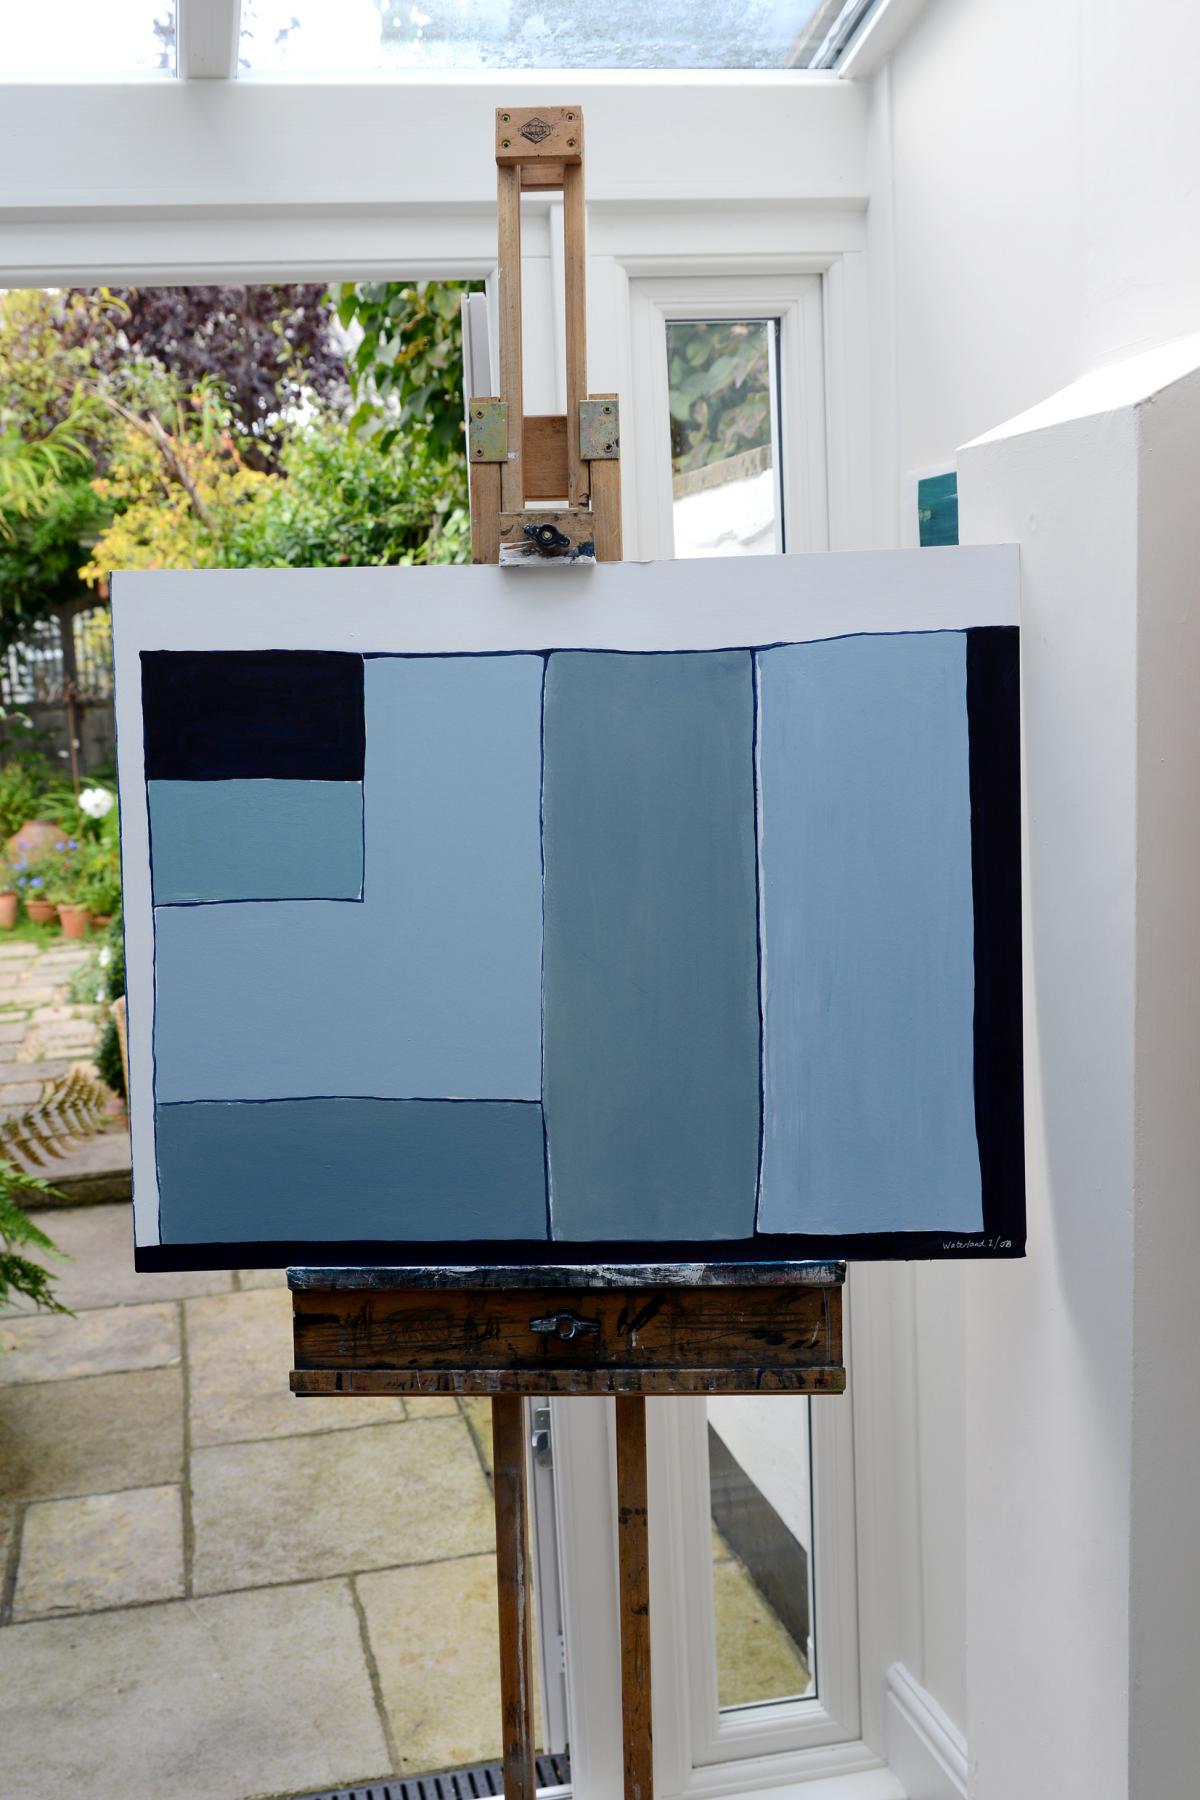 Artist Jane Brossard, opens up her home as part of Somerset Arts Week, Taunton.
Pictured one of Jane's Paintings, inspiried by the Somerset Levels